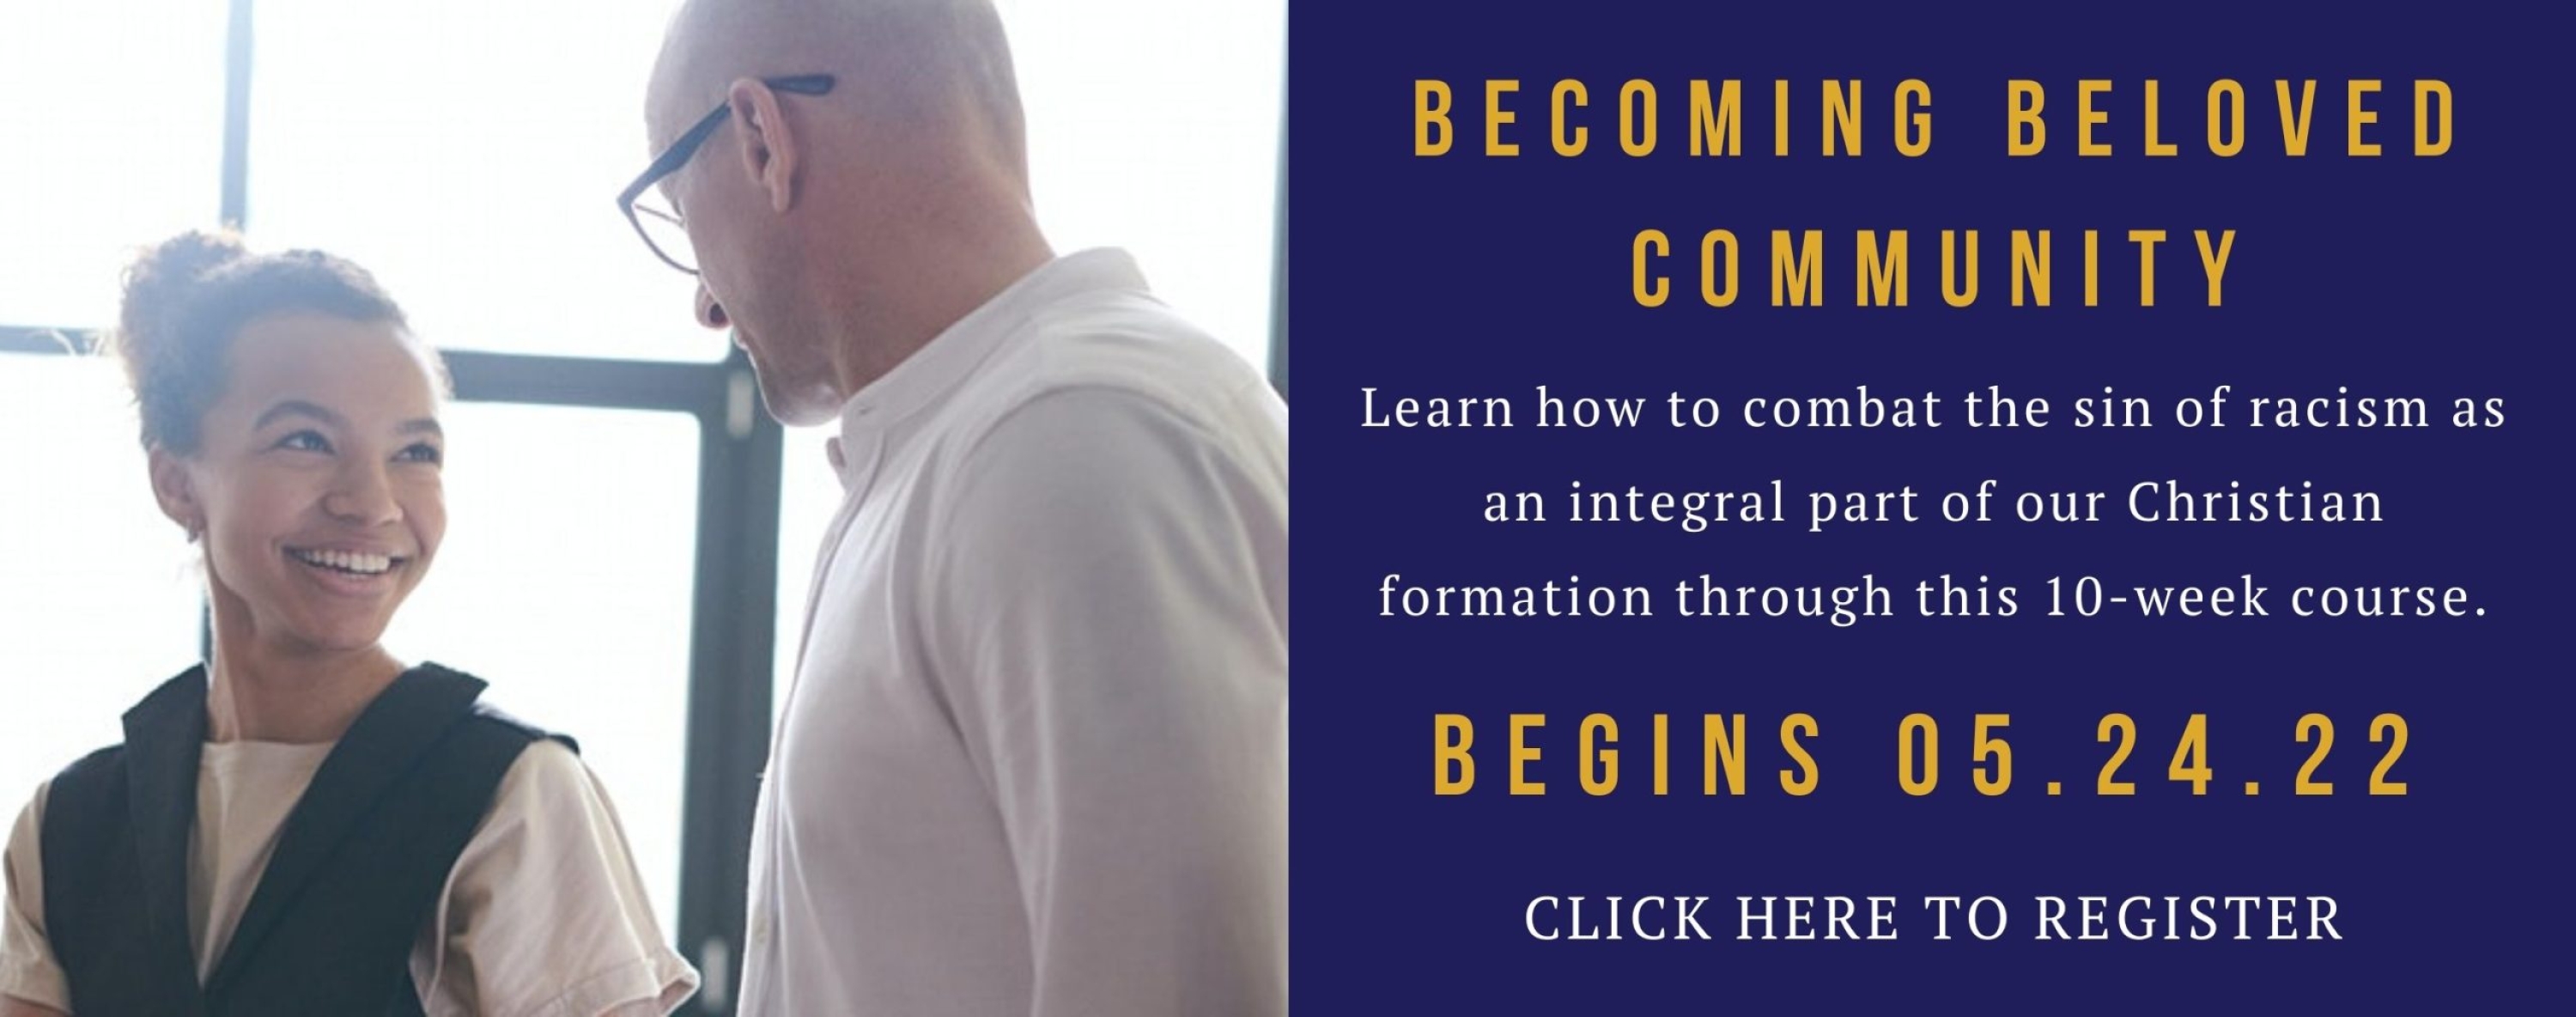 Becoming Beloved Community-- click here to register